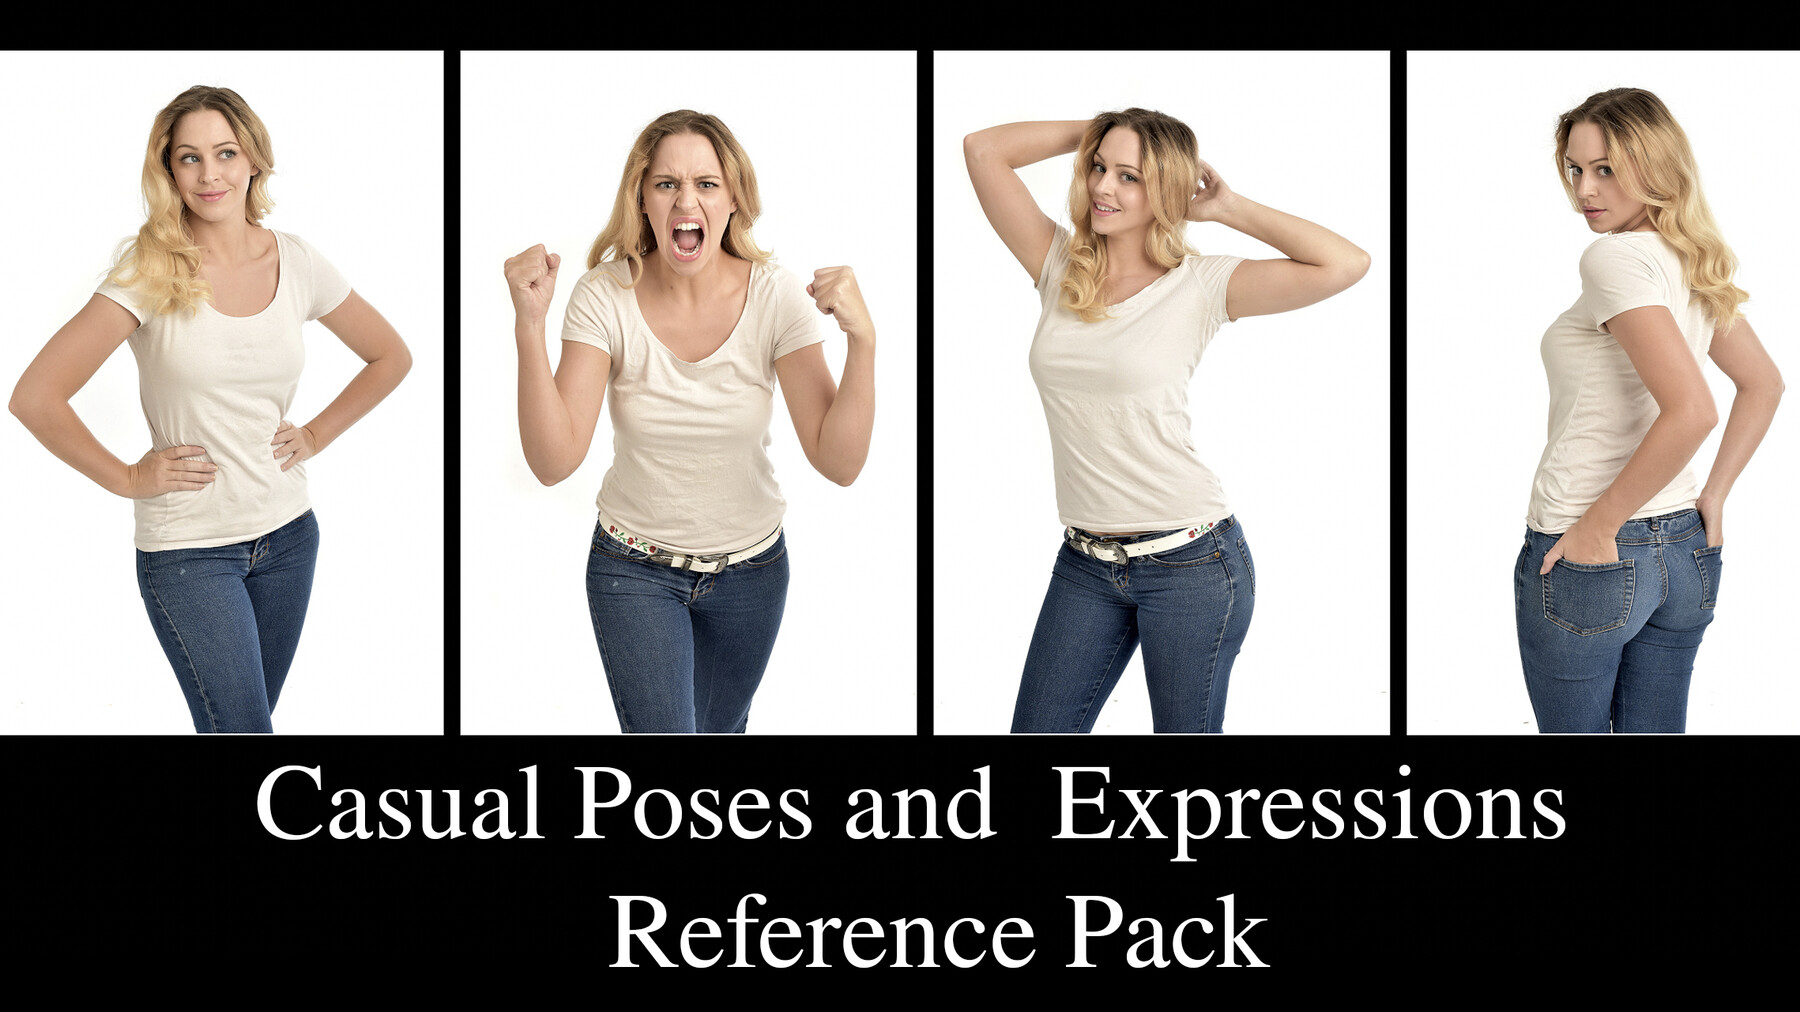 Second Life Marketplace - Apple Spice - Casual Poses 001-010 Fatpack